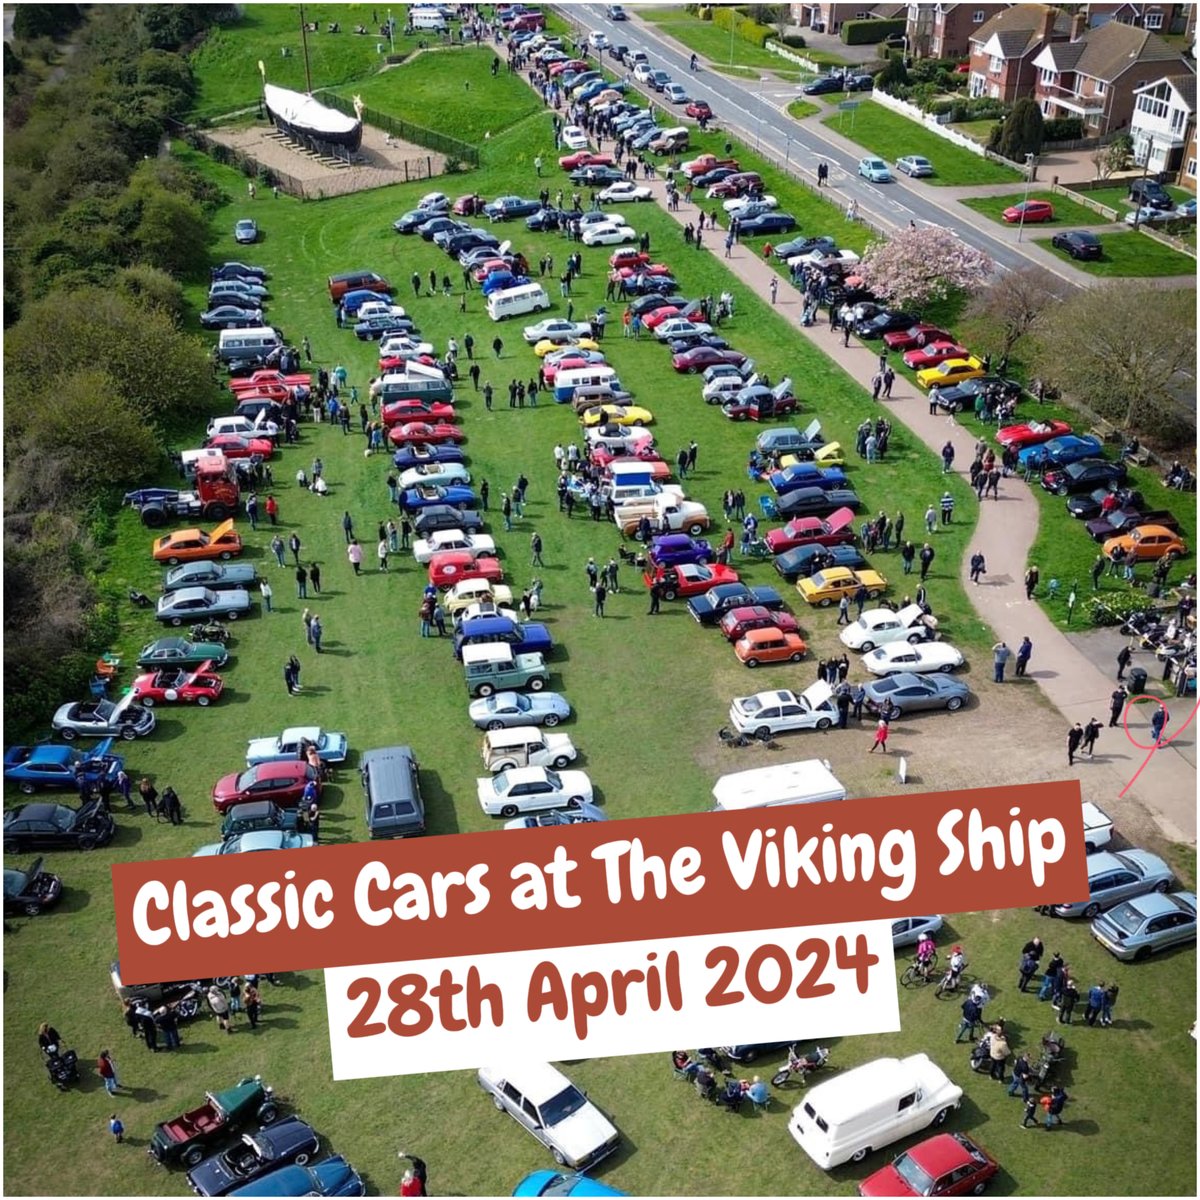 Classic Cars at The Viking Ship - Sunday 28th April 2024
Last years gathering was massive so let’s get those cars and bikes out for a chilled out meet down at the Viking Ship Cafe, CT12 5HY.
#ramsgate #ramsgatekent #cliffsend #vikingship #sandwich #thanet #kent #classiccar